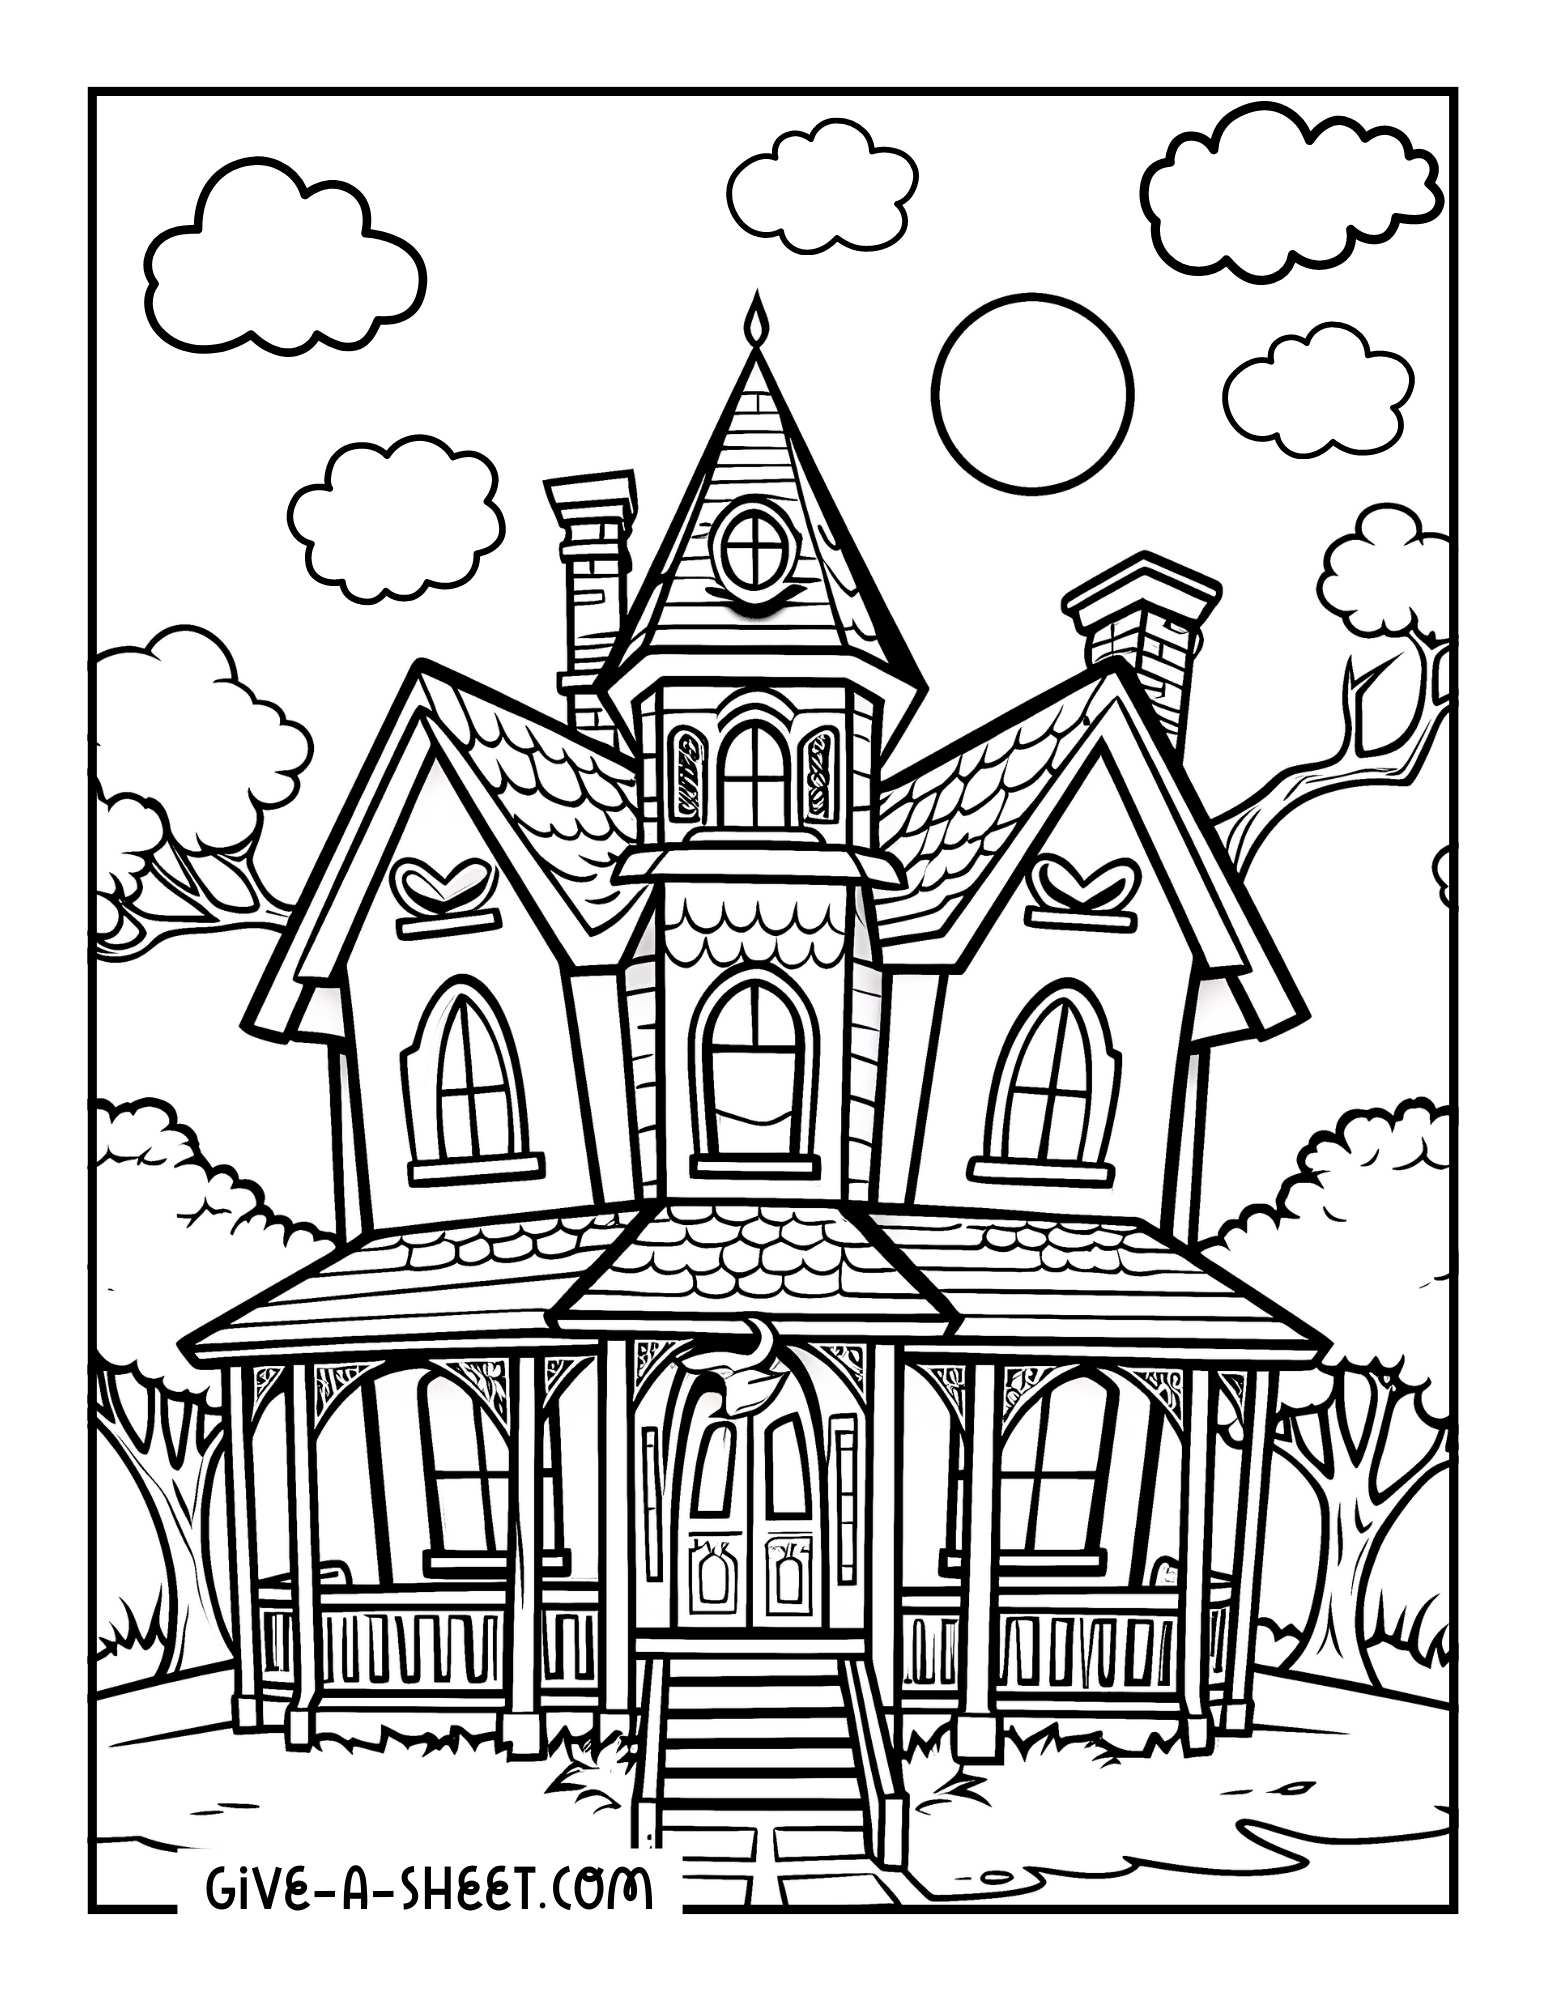 Haunted house with small details to color in.